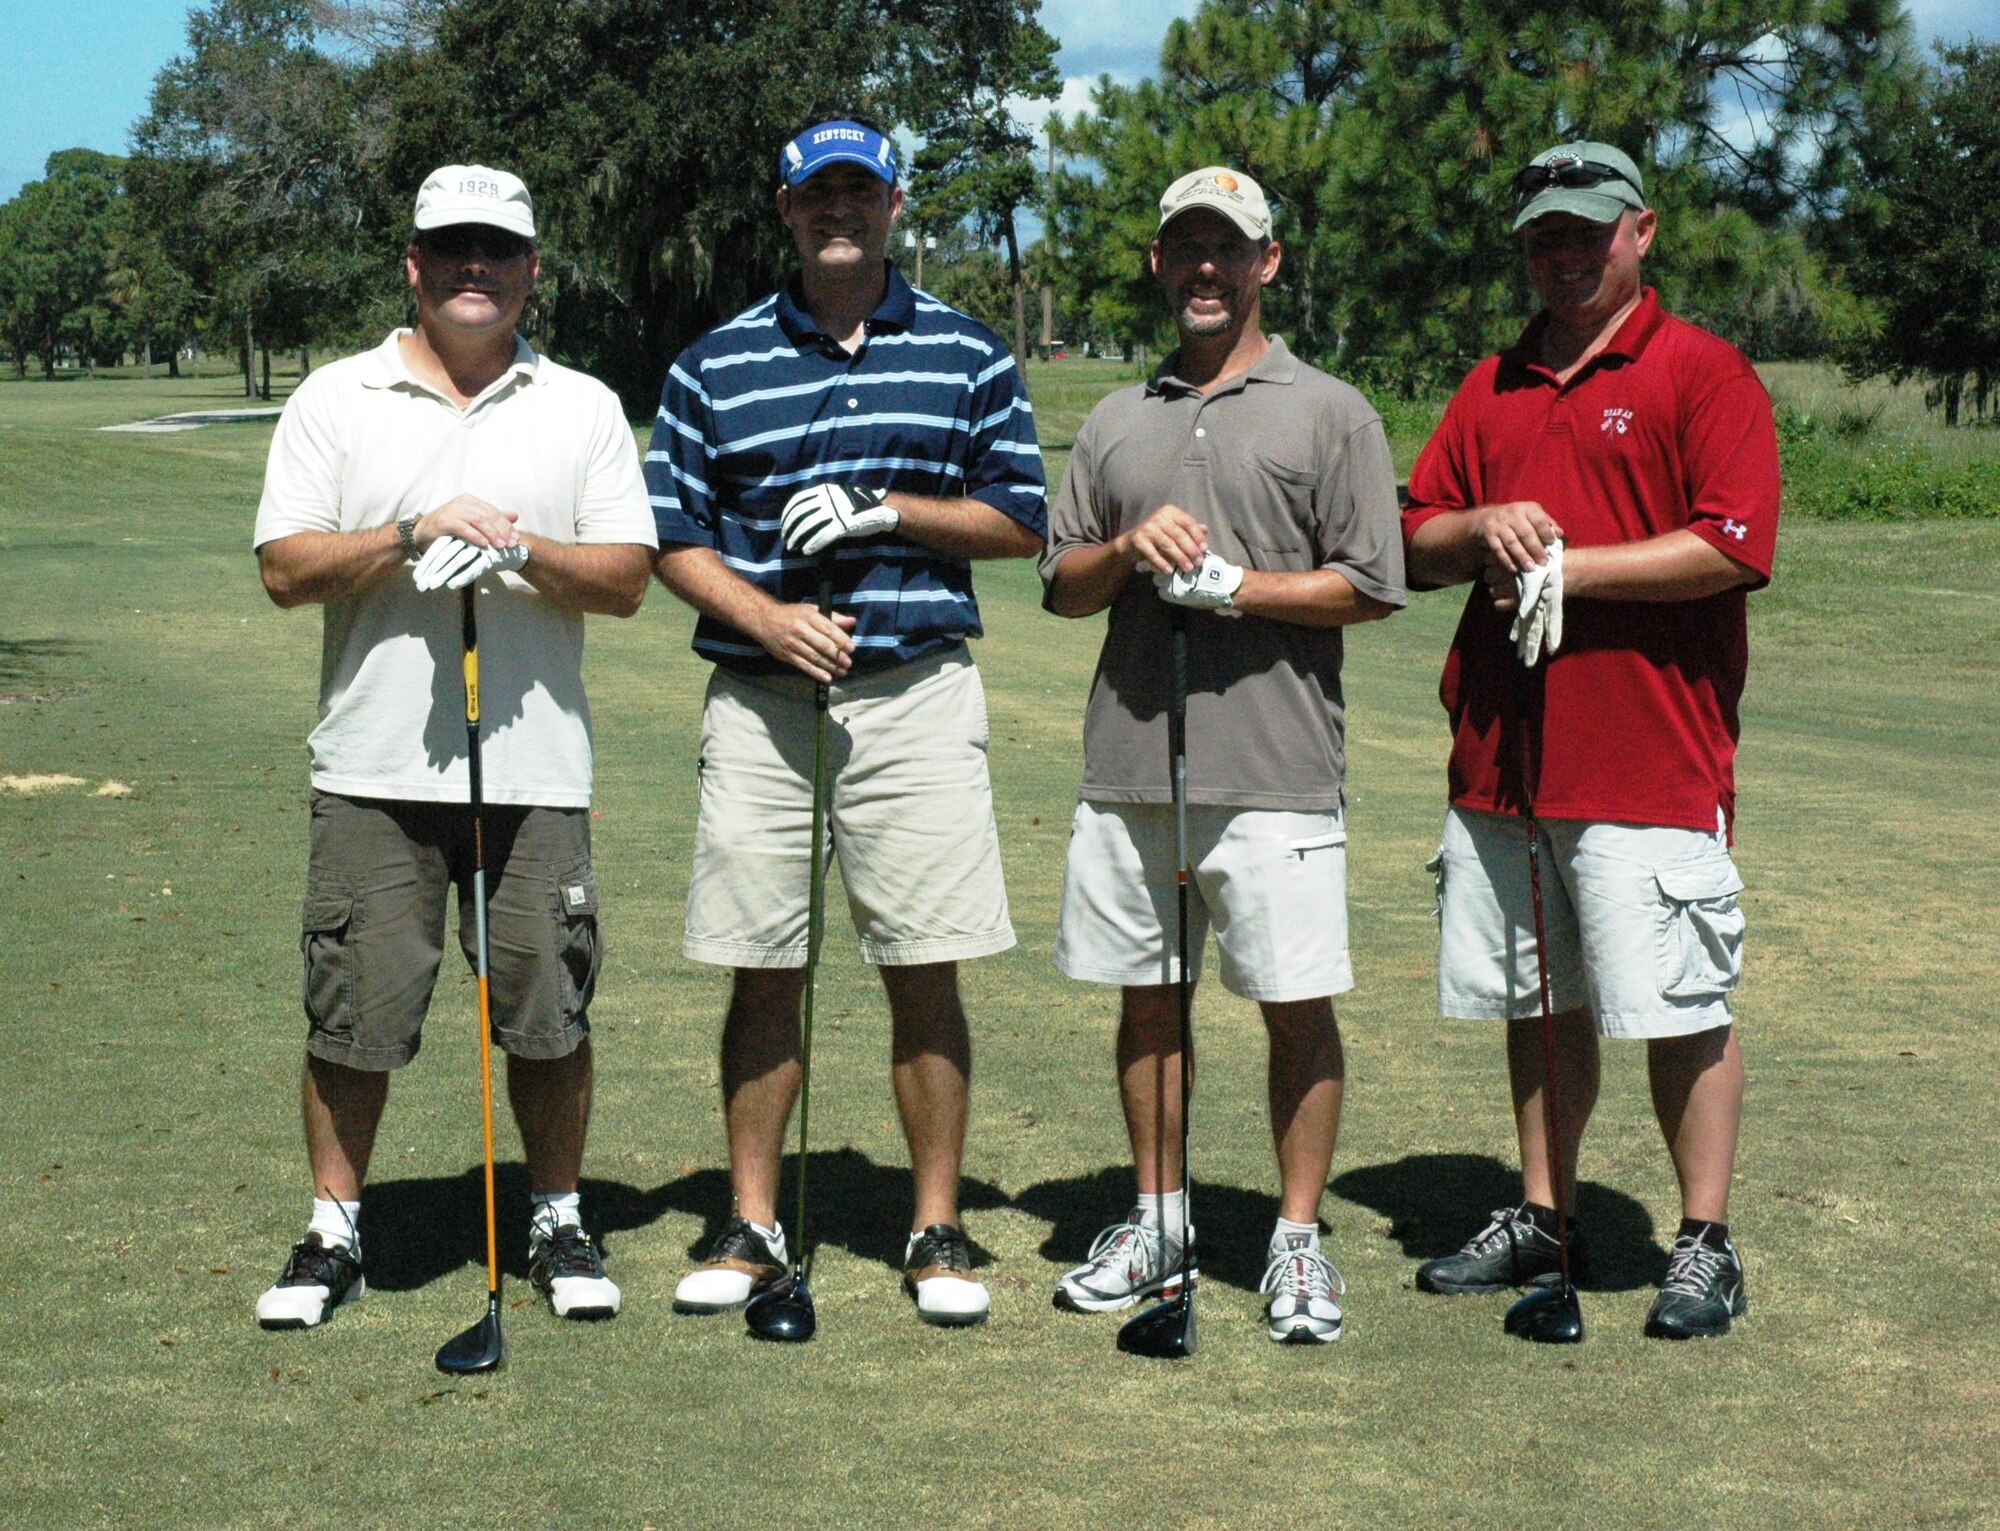 Tyndall Air Force Base held an Air Force Ball Golf Tournament Aug 28th. The winners were Patrick Kelly, John Caldwell, Eddie Henry and Master Sgt. Jeff Large, all of whom are from the 325th Civil Engineer Squadron.